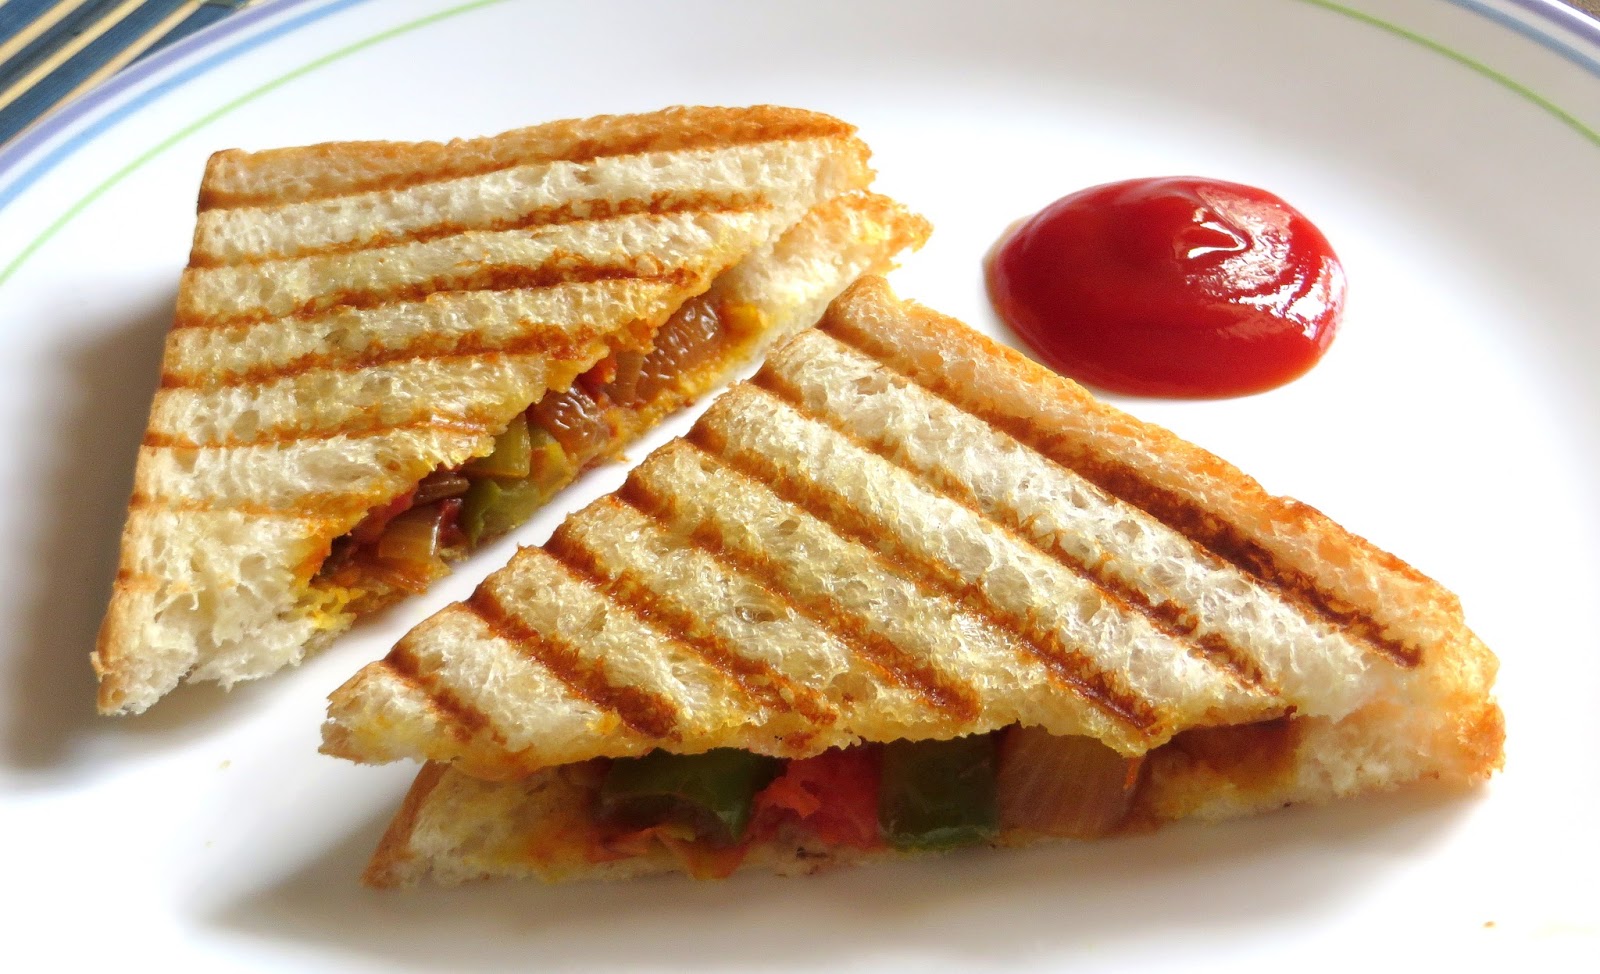 Paajaka Recipes: Spicy Grilled Vegetable Sandwich